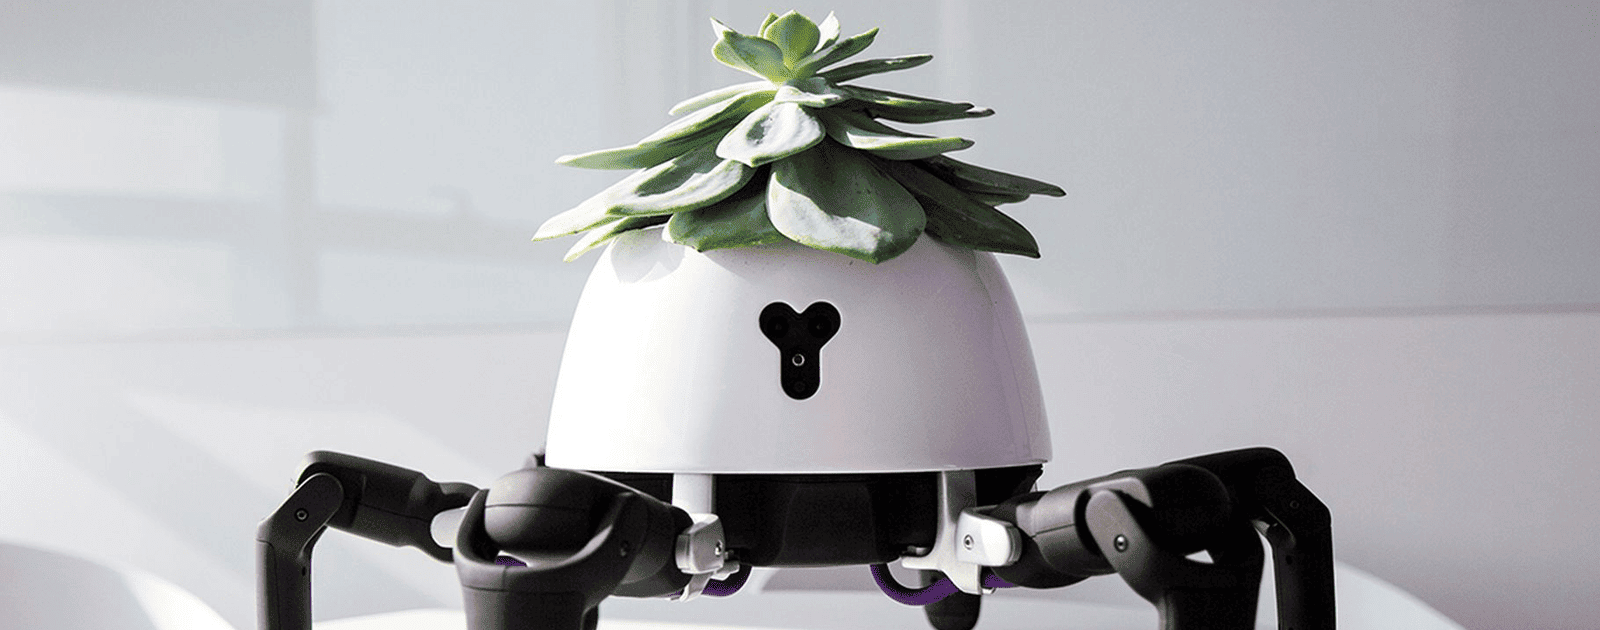 This Robot Gardener Chases After Sunlight